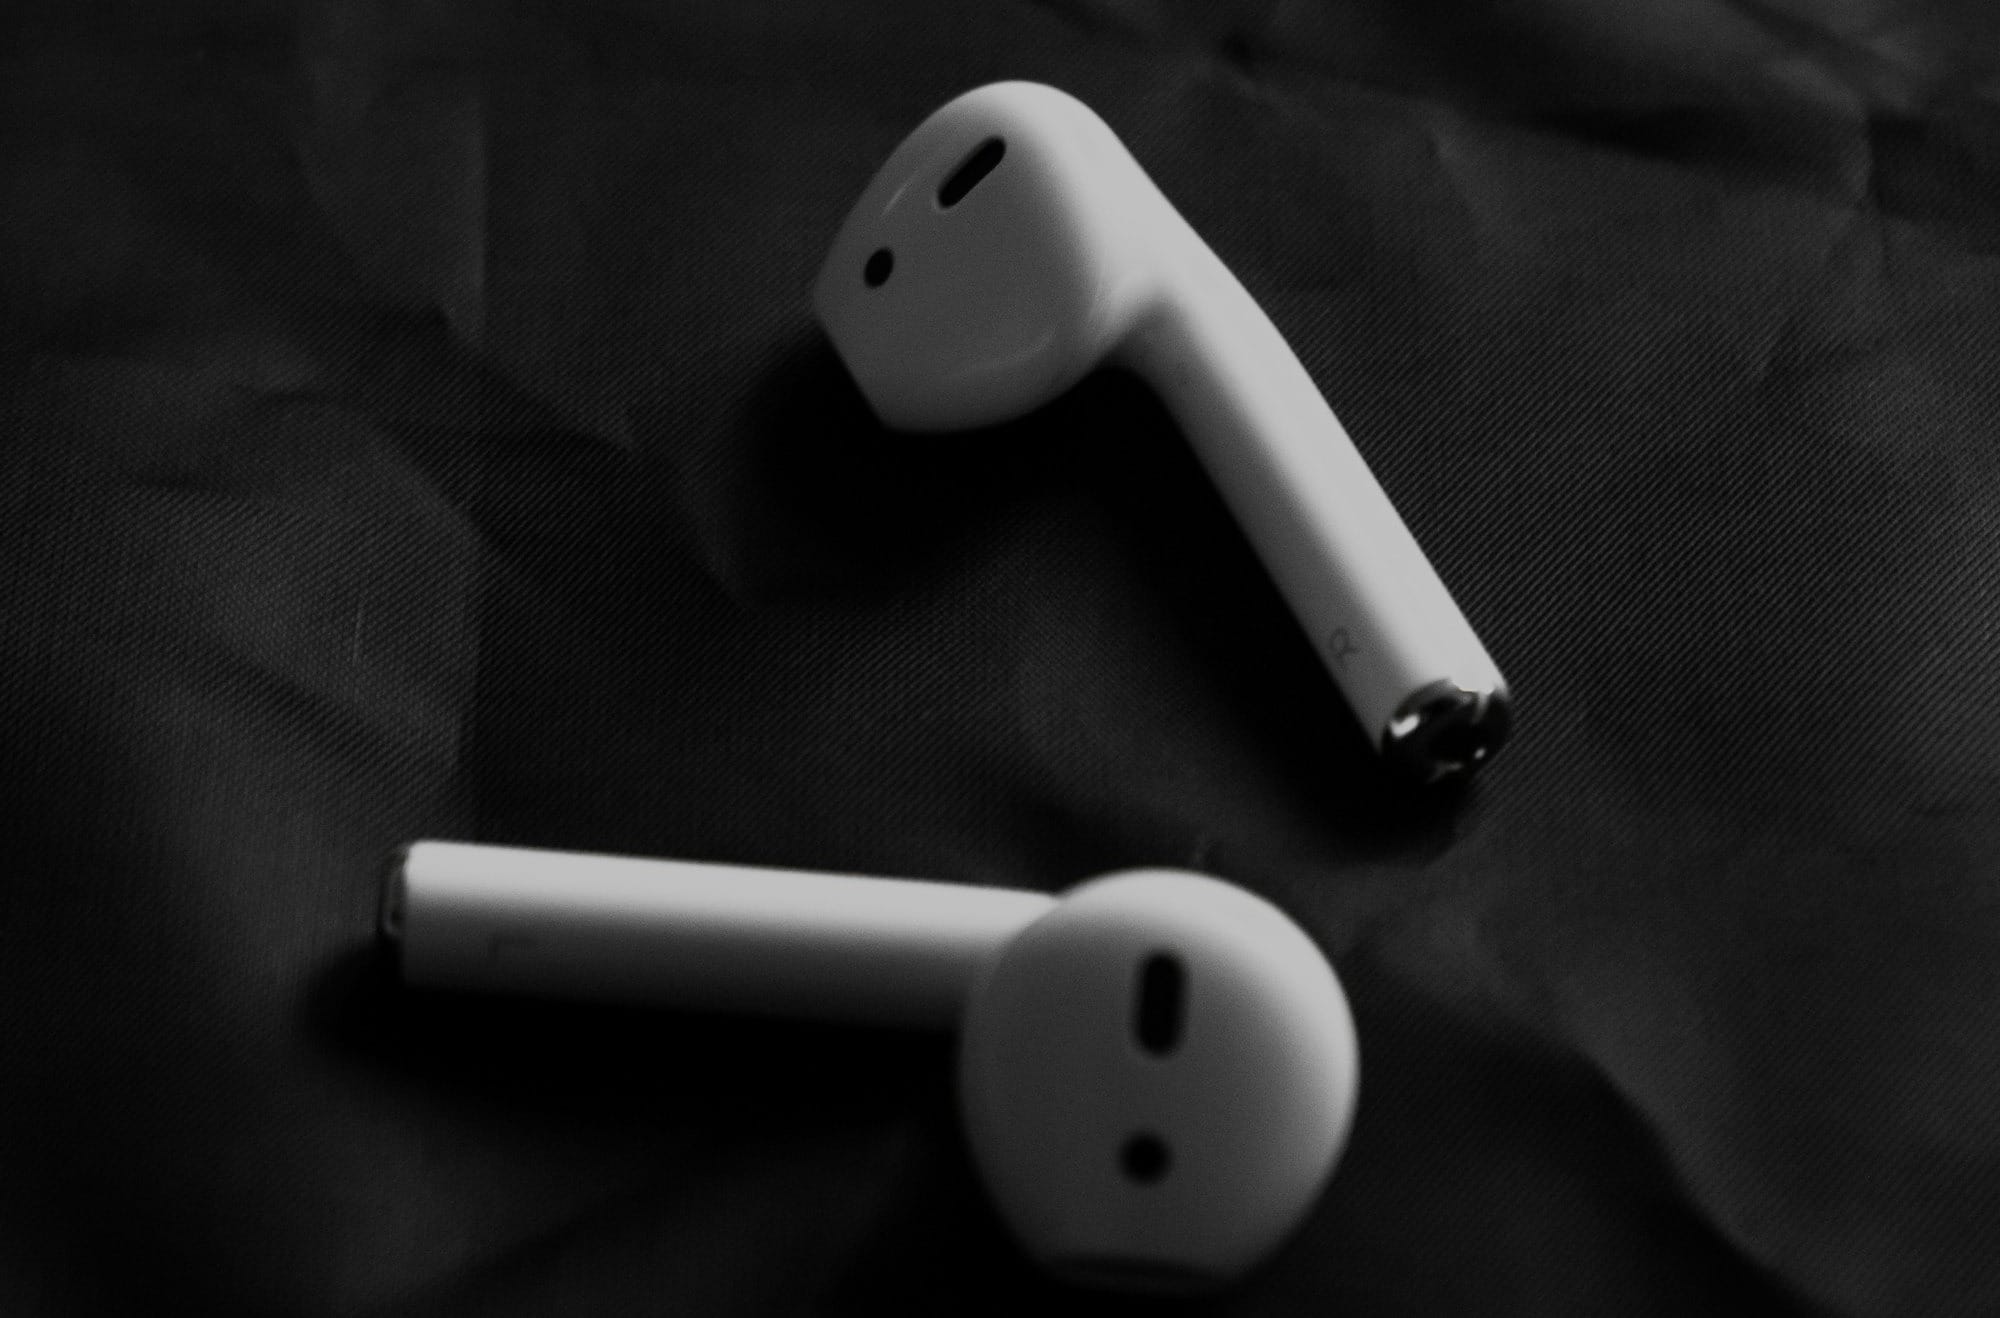 How to pair and use AirPods on your Android phone